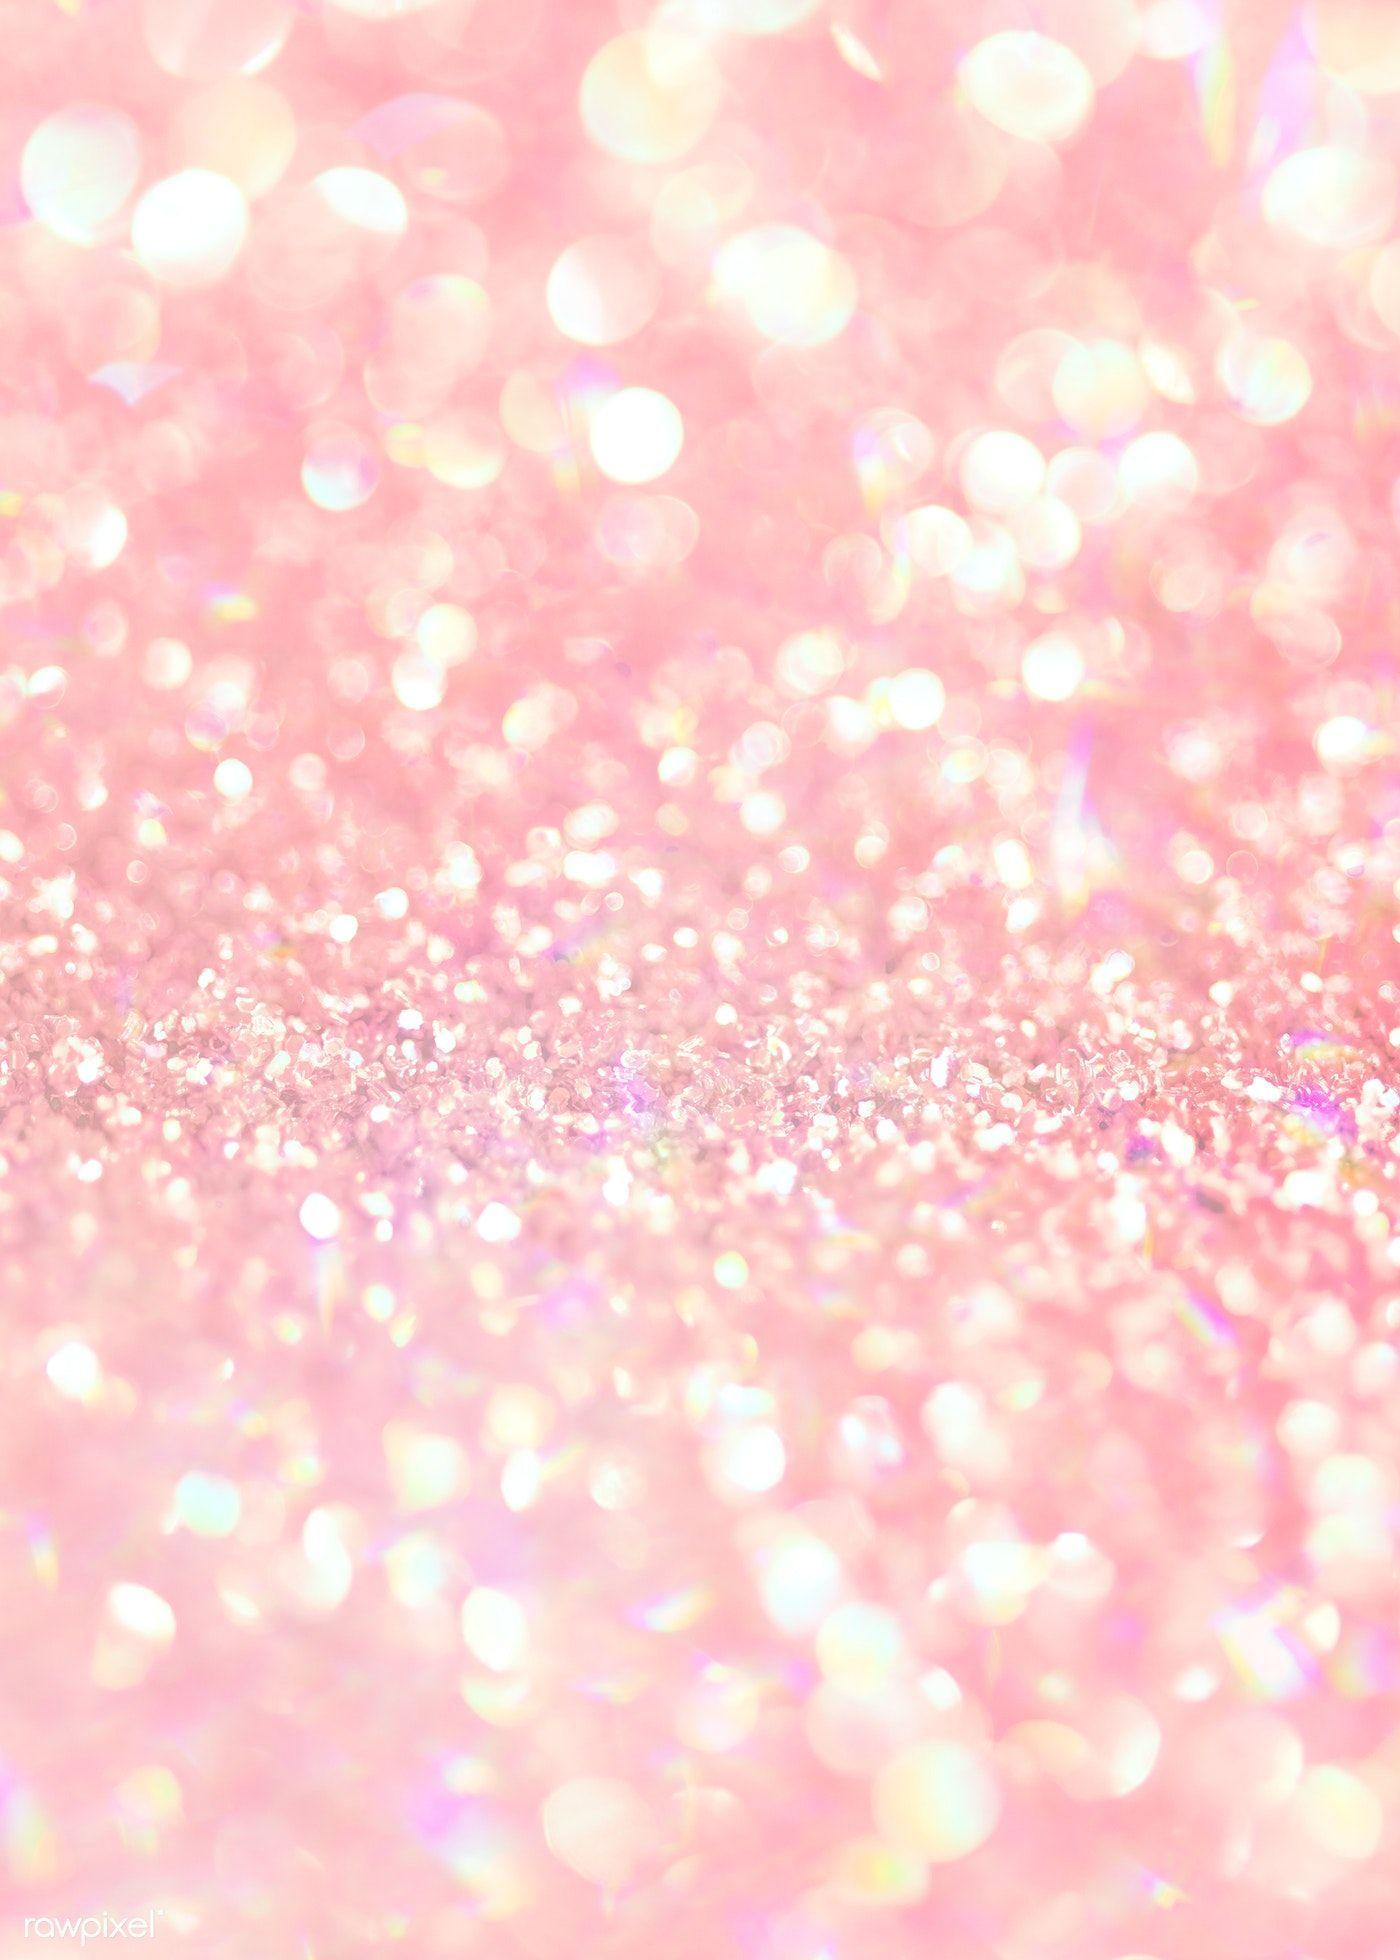 Light Pink Sparkle Wallpapers - Top Free Light Pink Sparkle Backgrounds ...